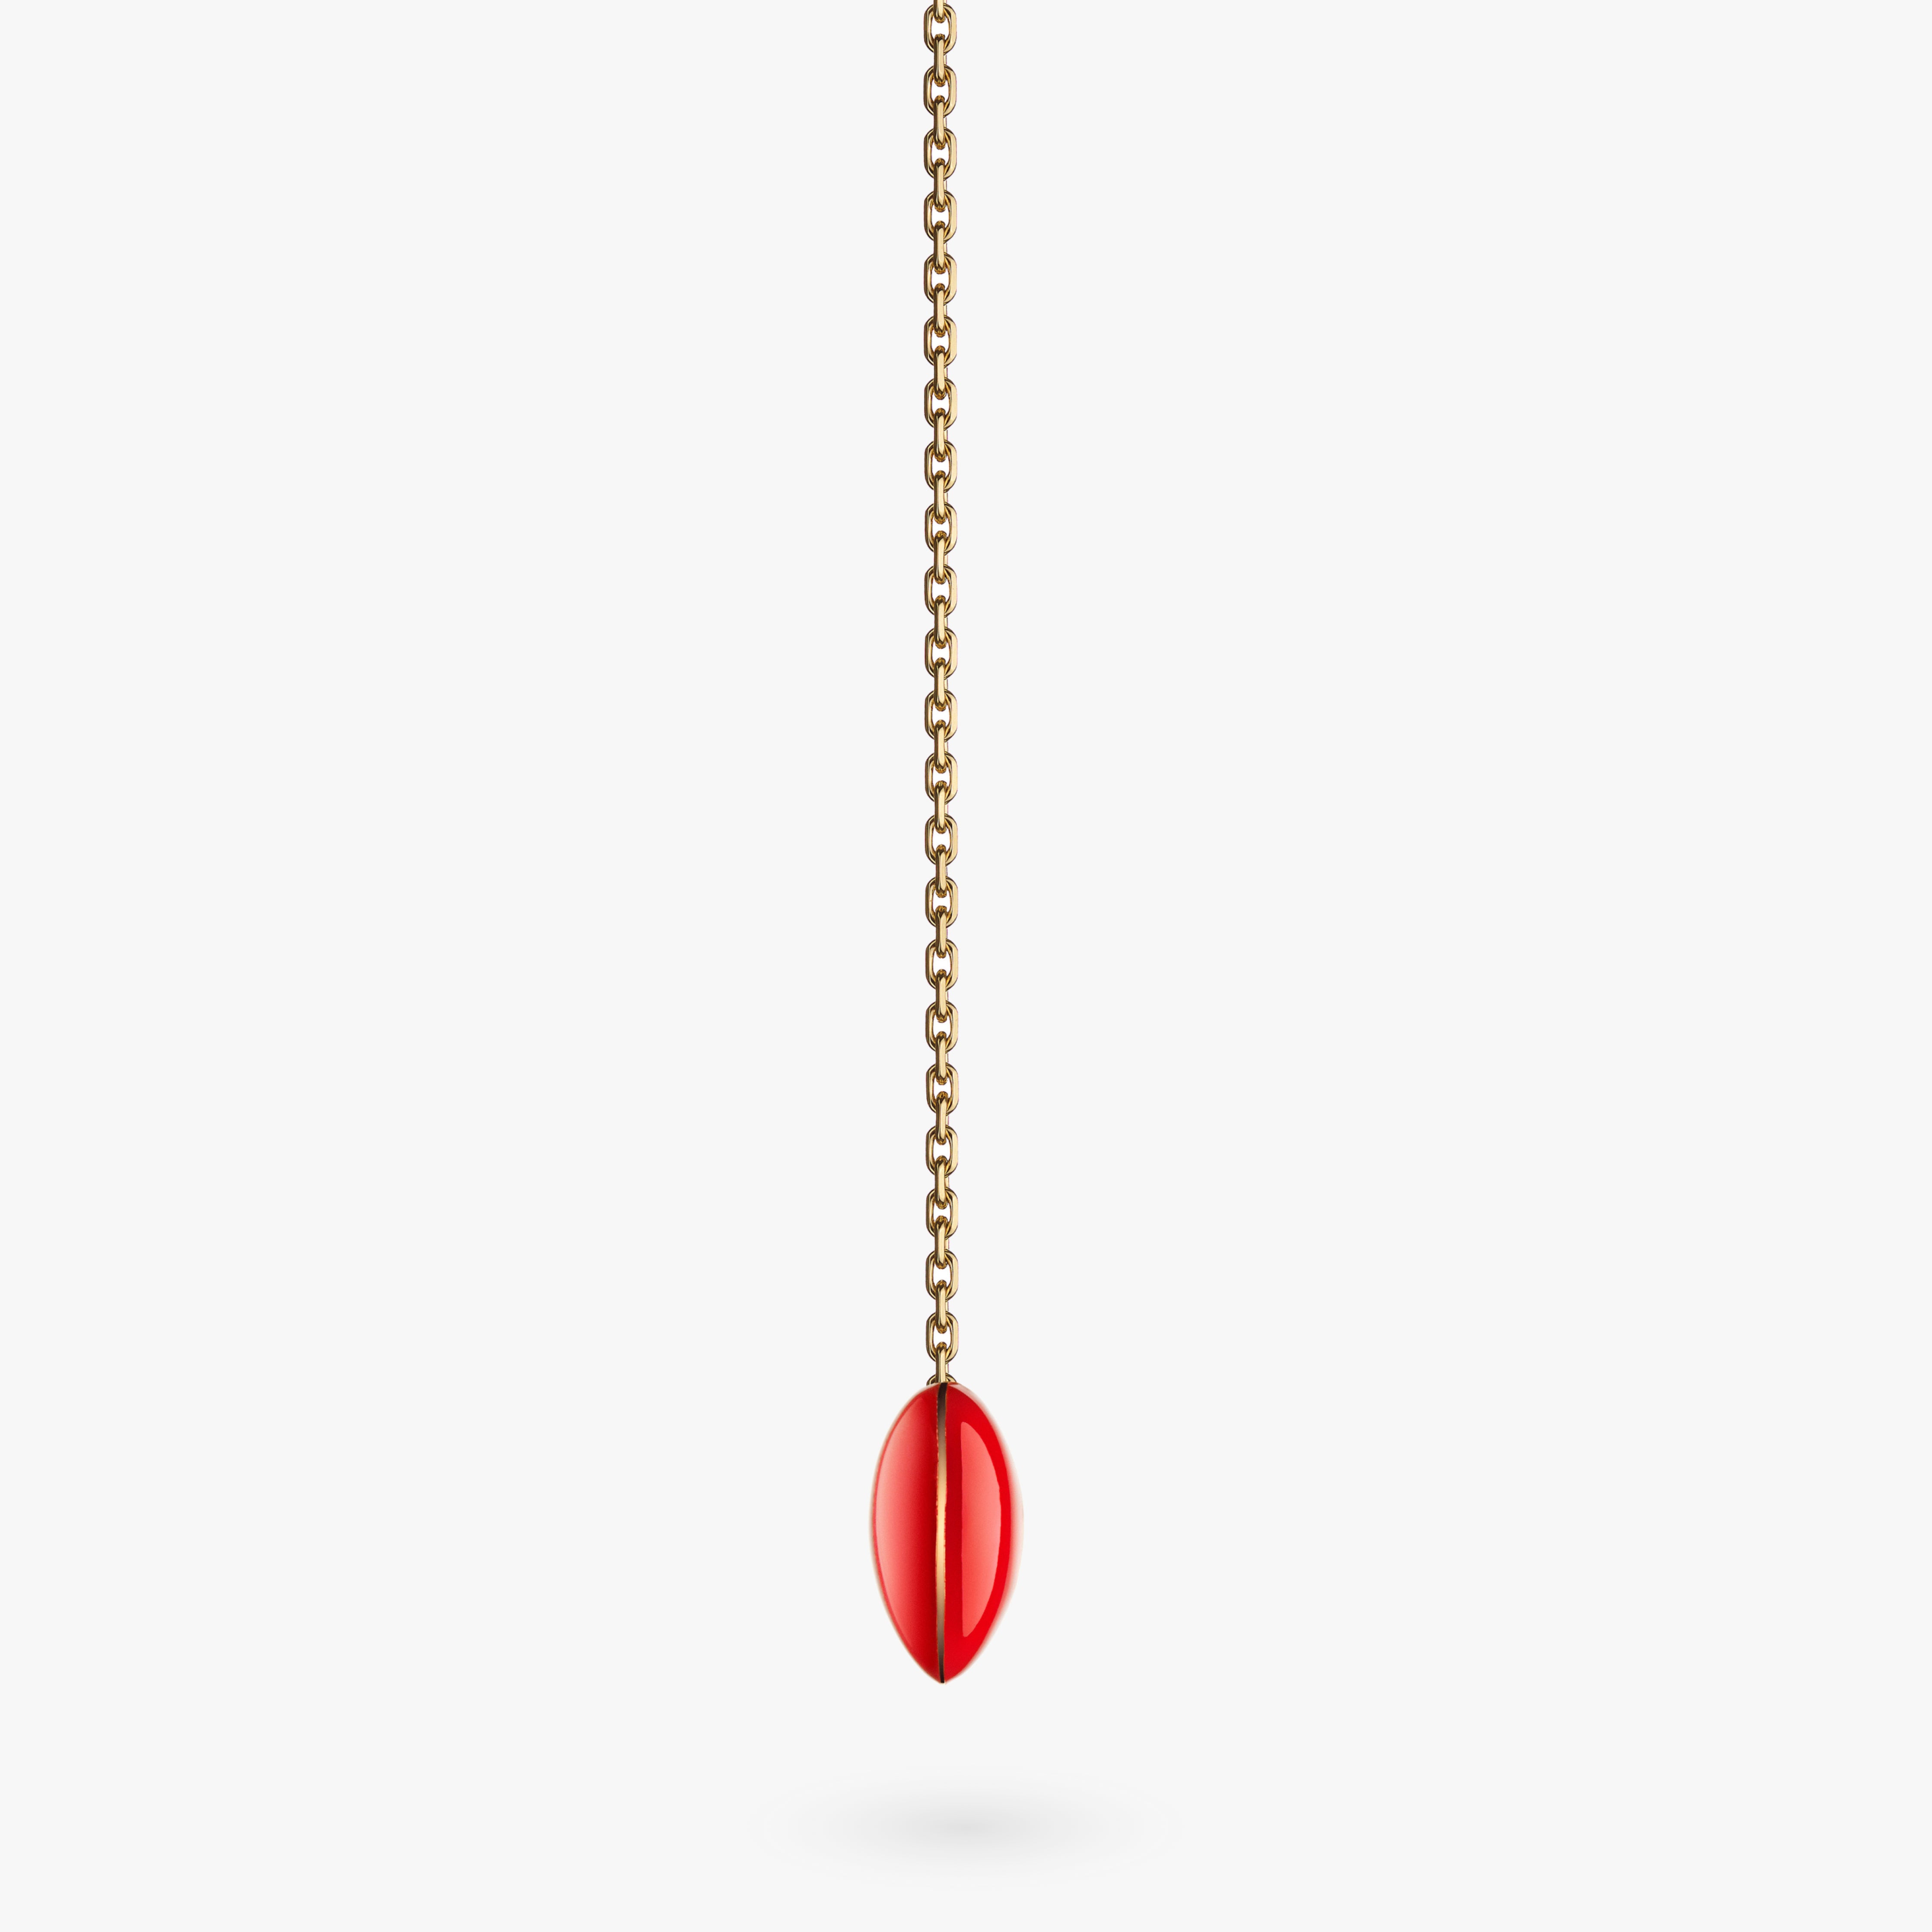 Small red heart necklace